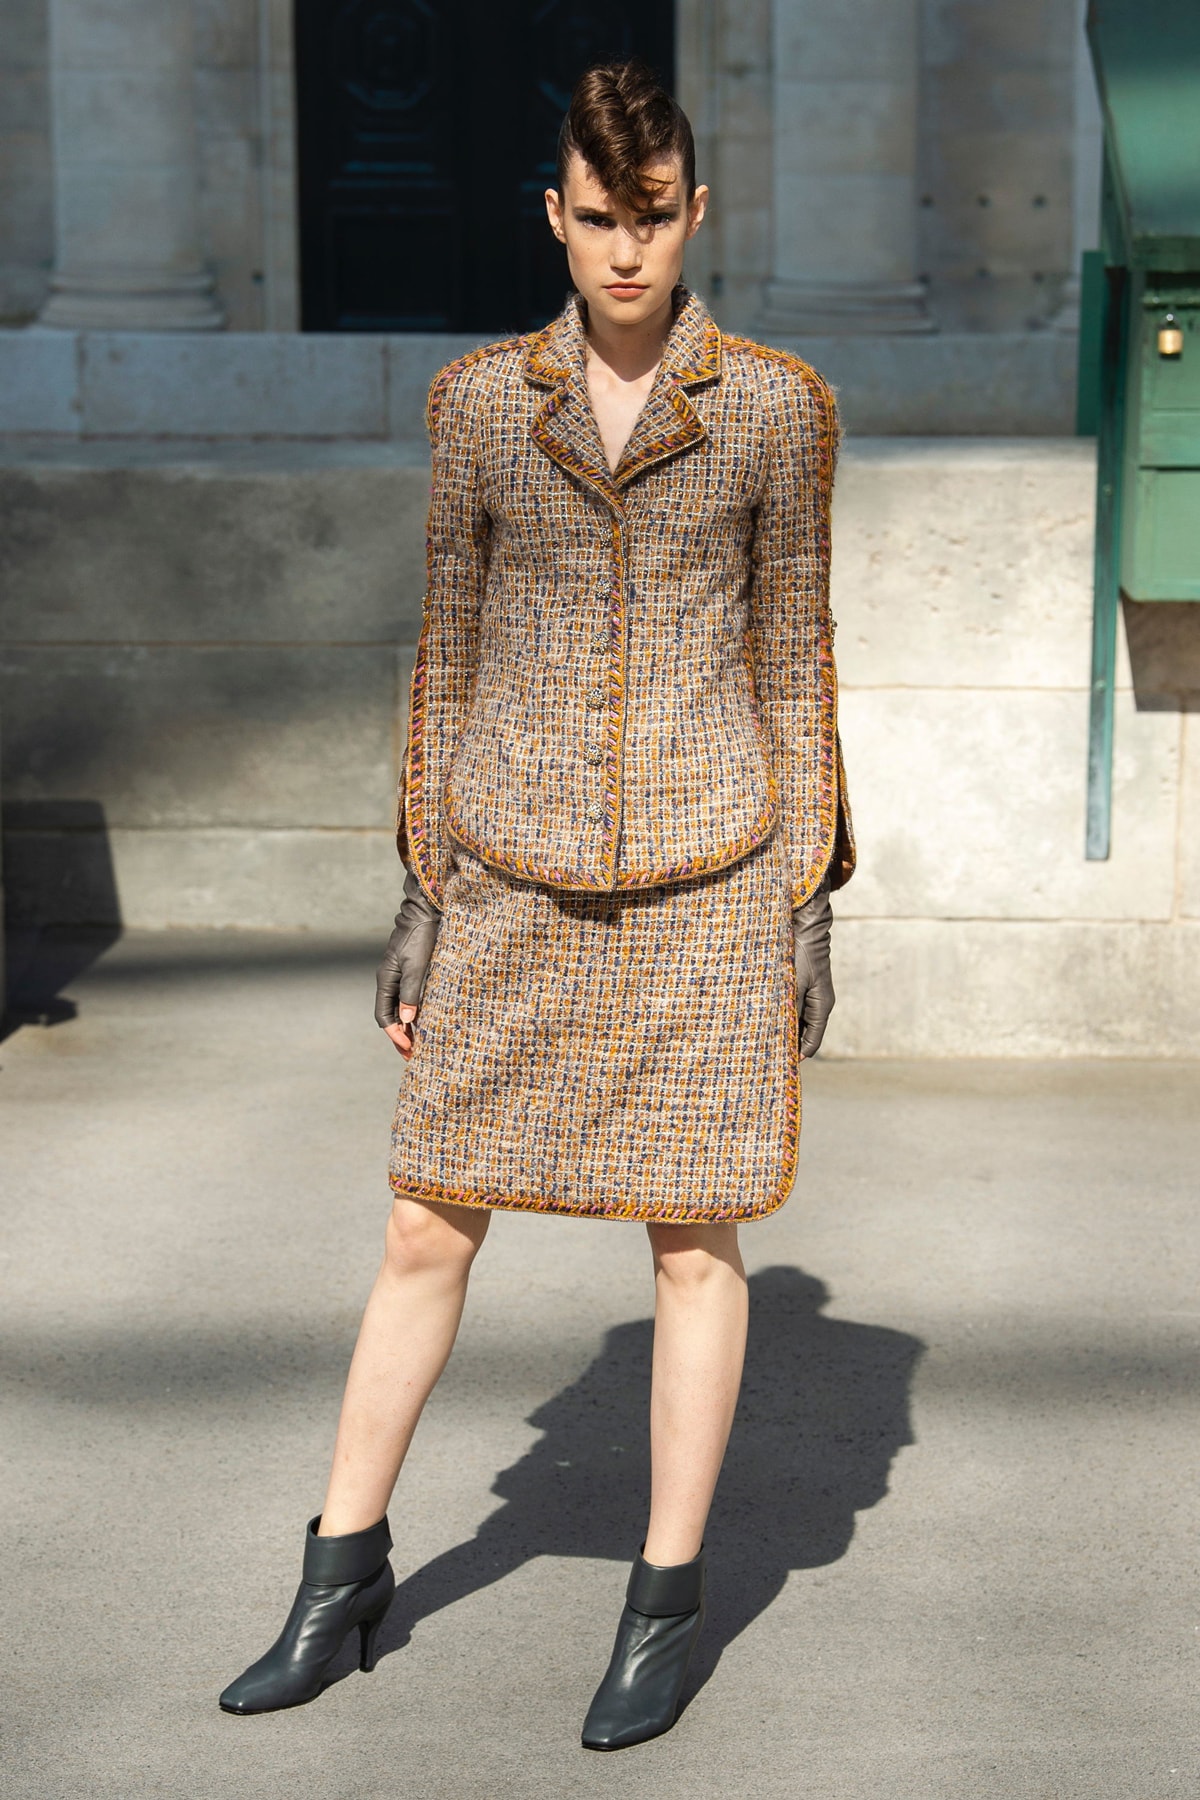 Chanel Fall 2018 Couture Show Collection Blazer Skirt Orange Brown Boots Black